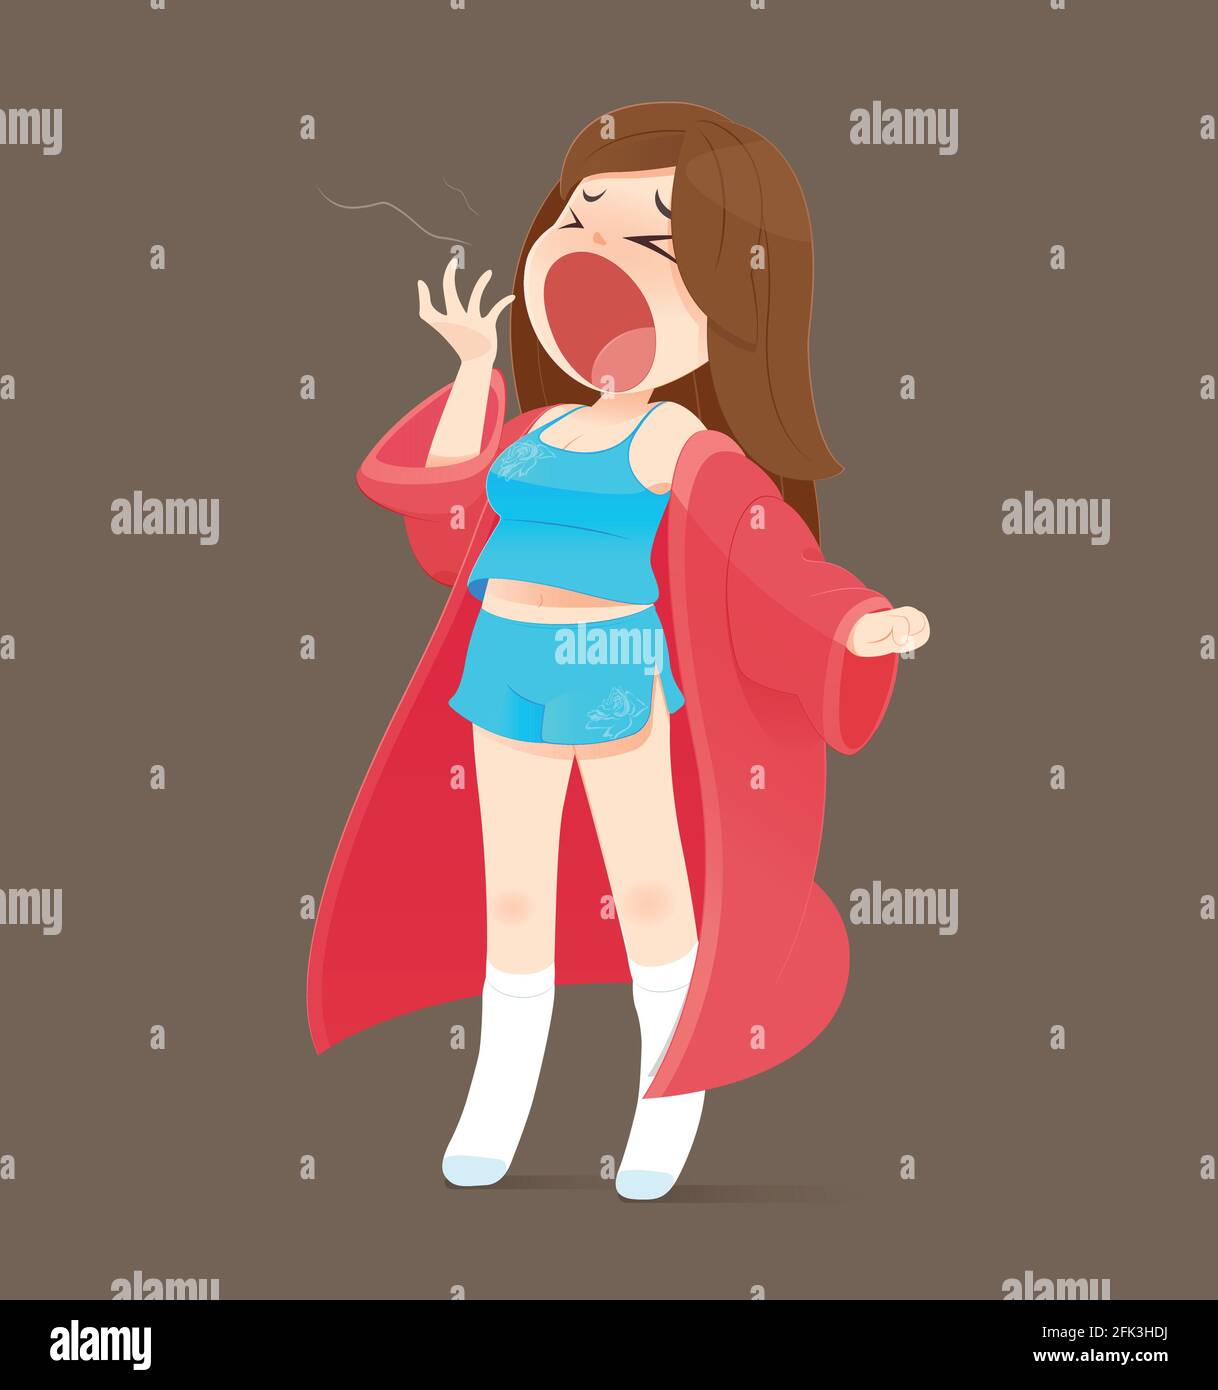 Illustration woman in blue pajamas and red robe standing yawn on brown background, Vector Cartoon Stock Vector